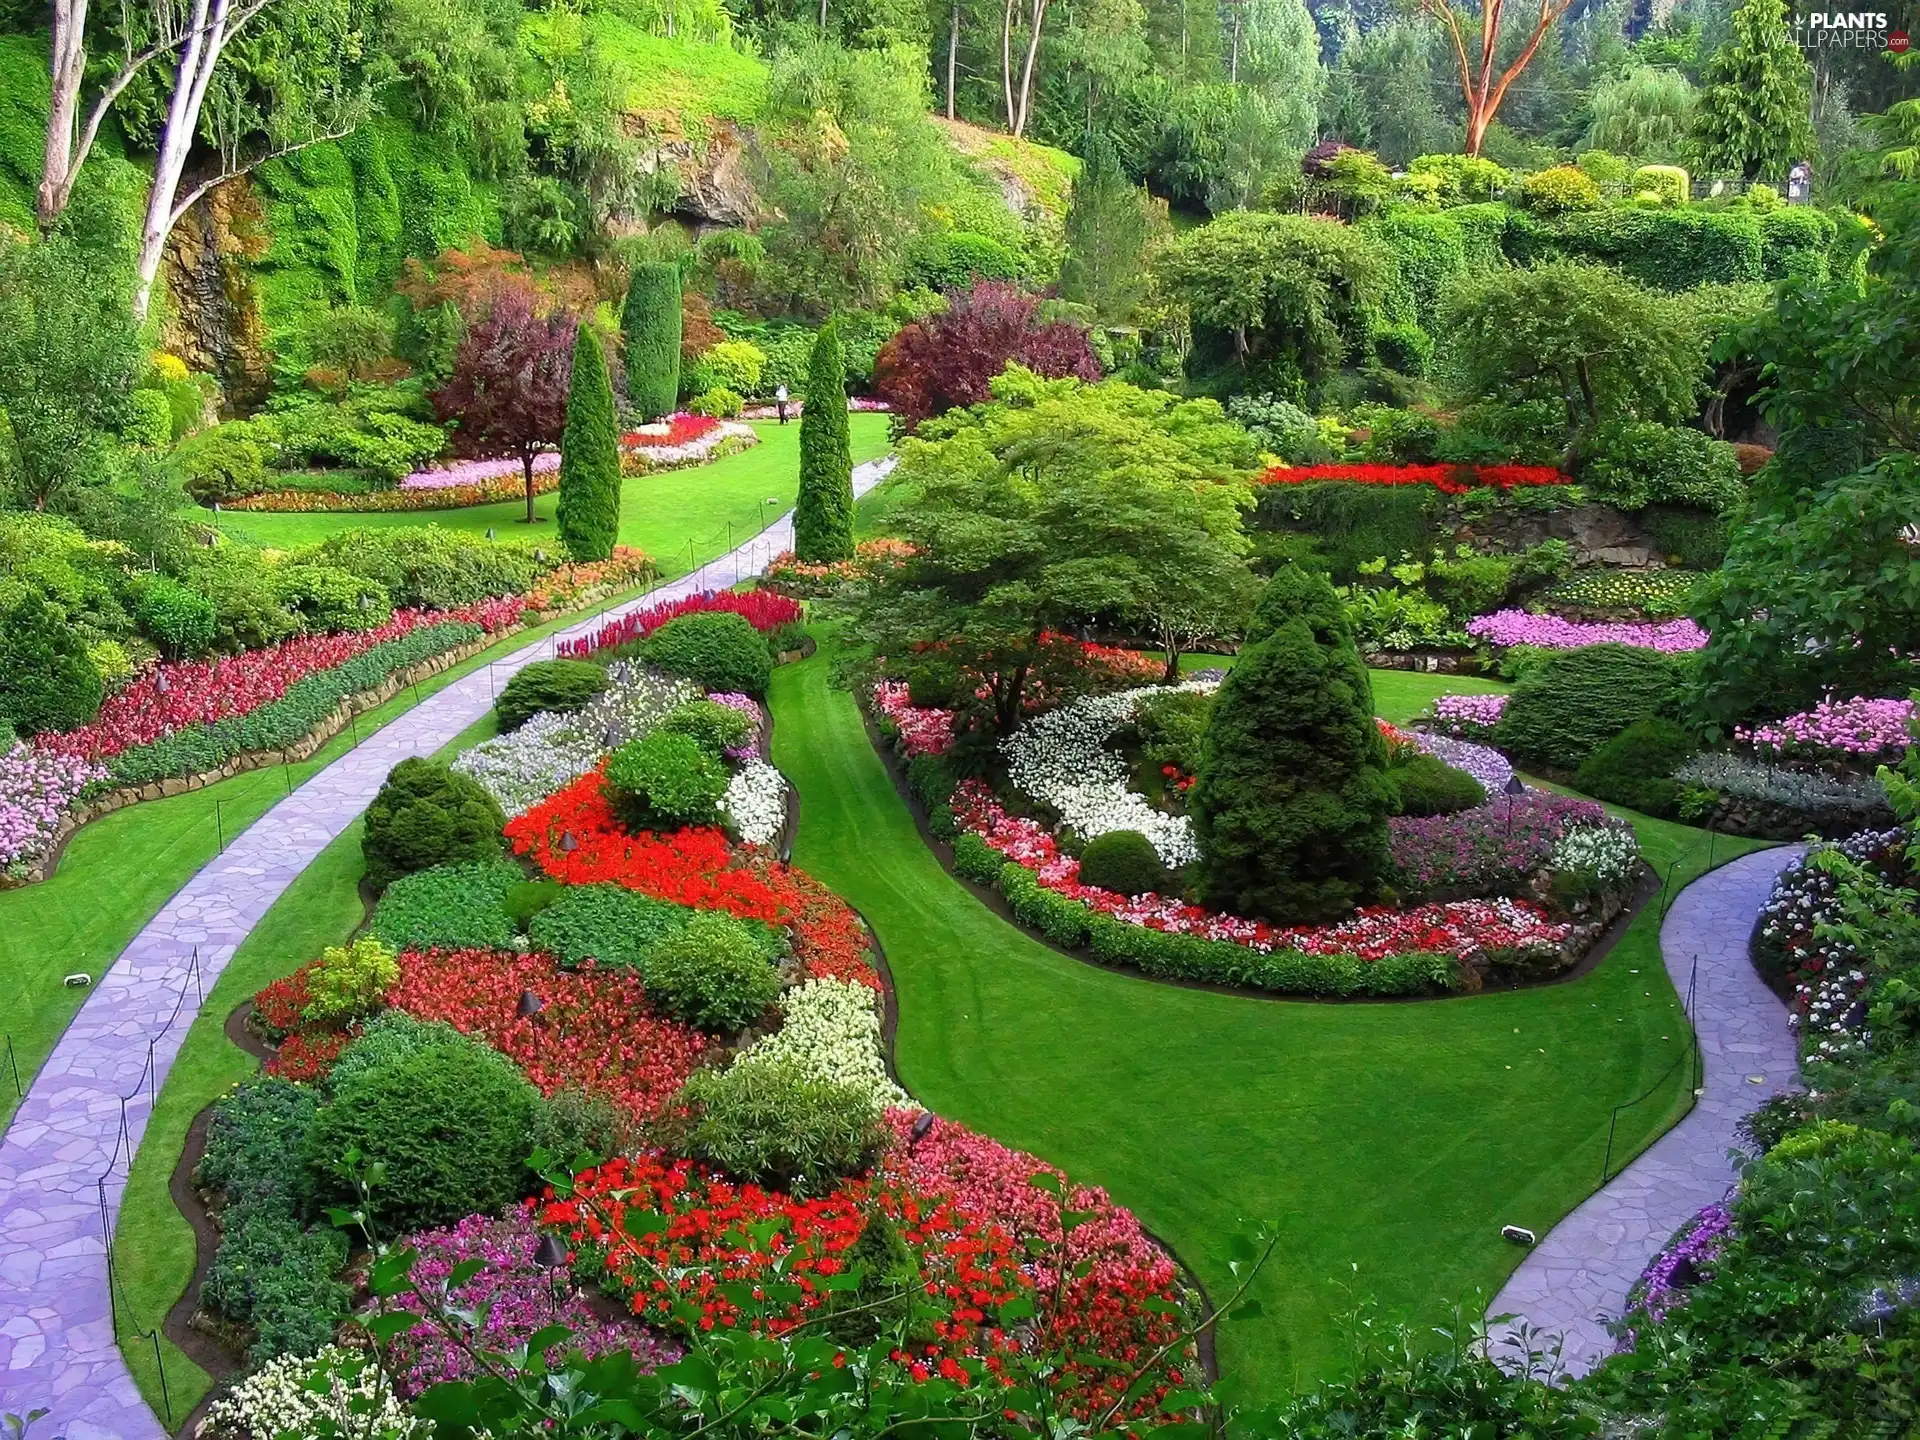 Flowers, Park, viewes, grass, trees, Gardens